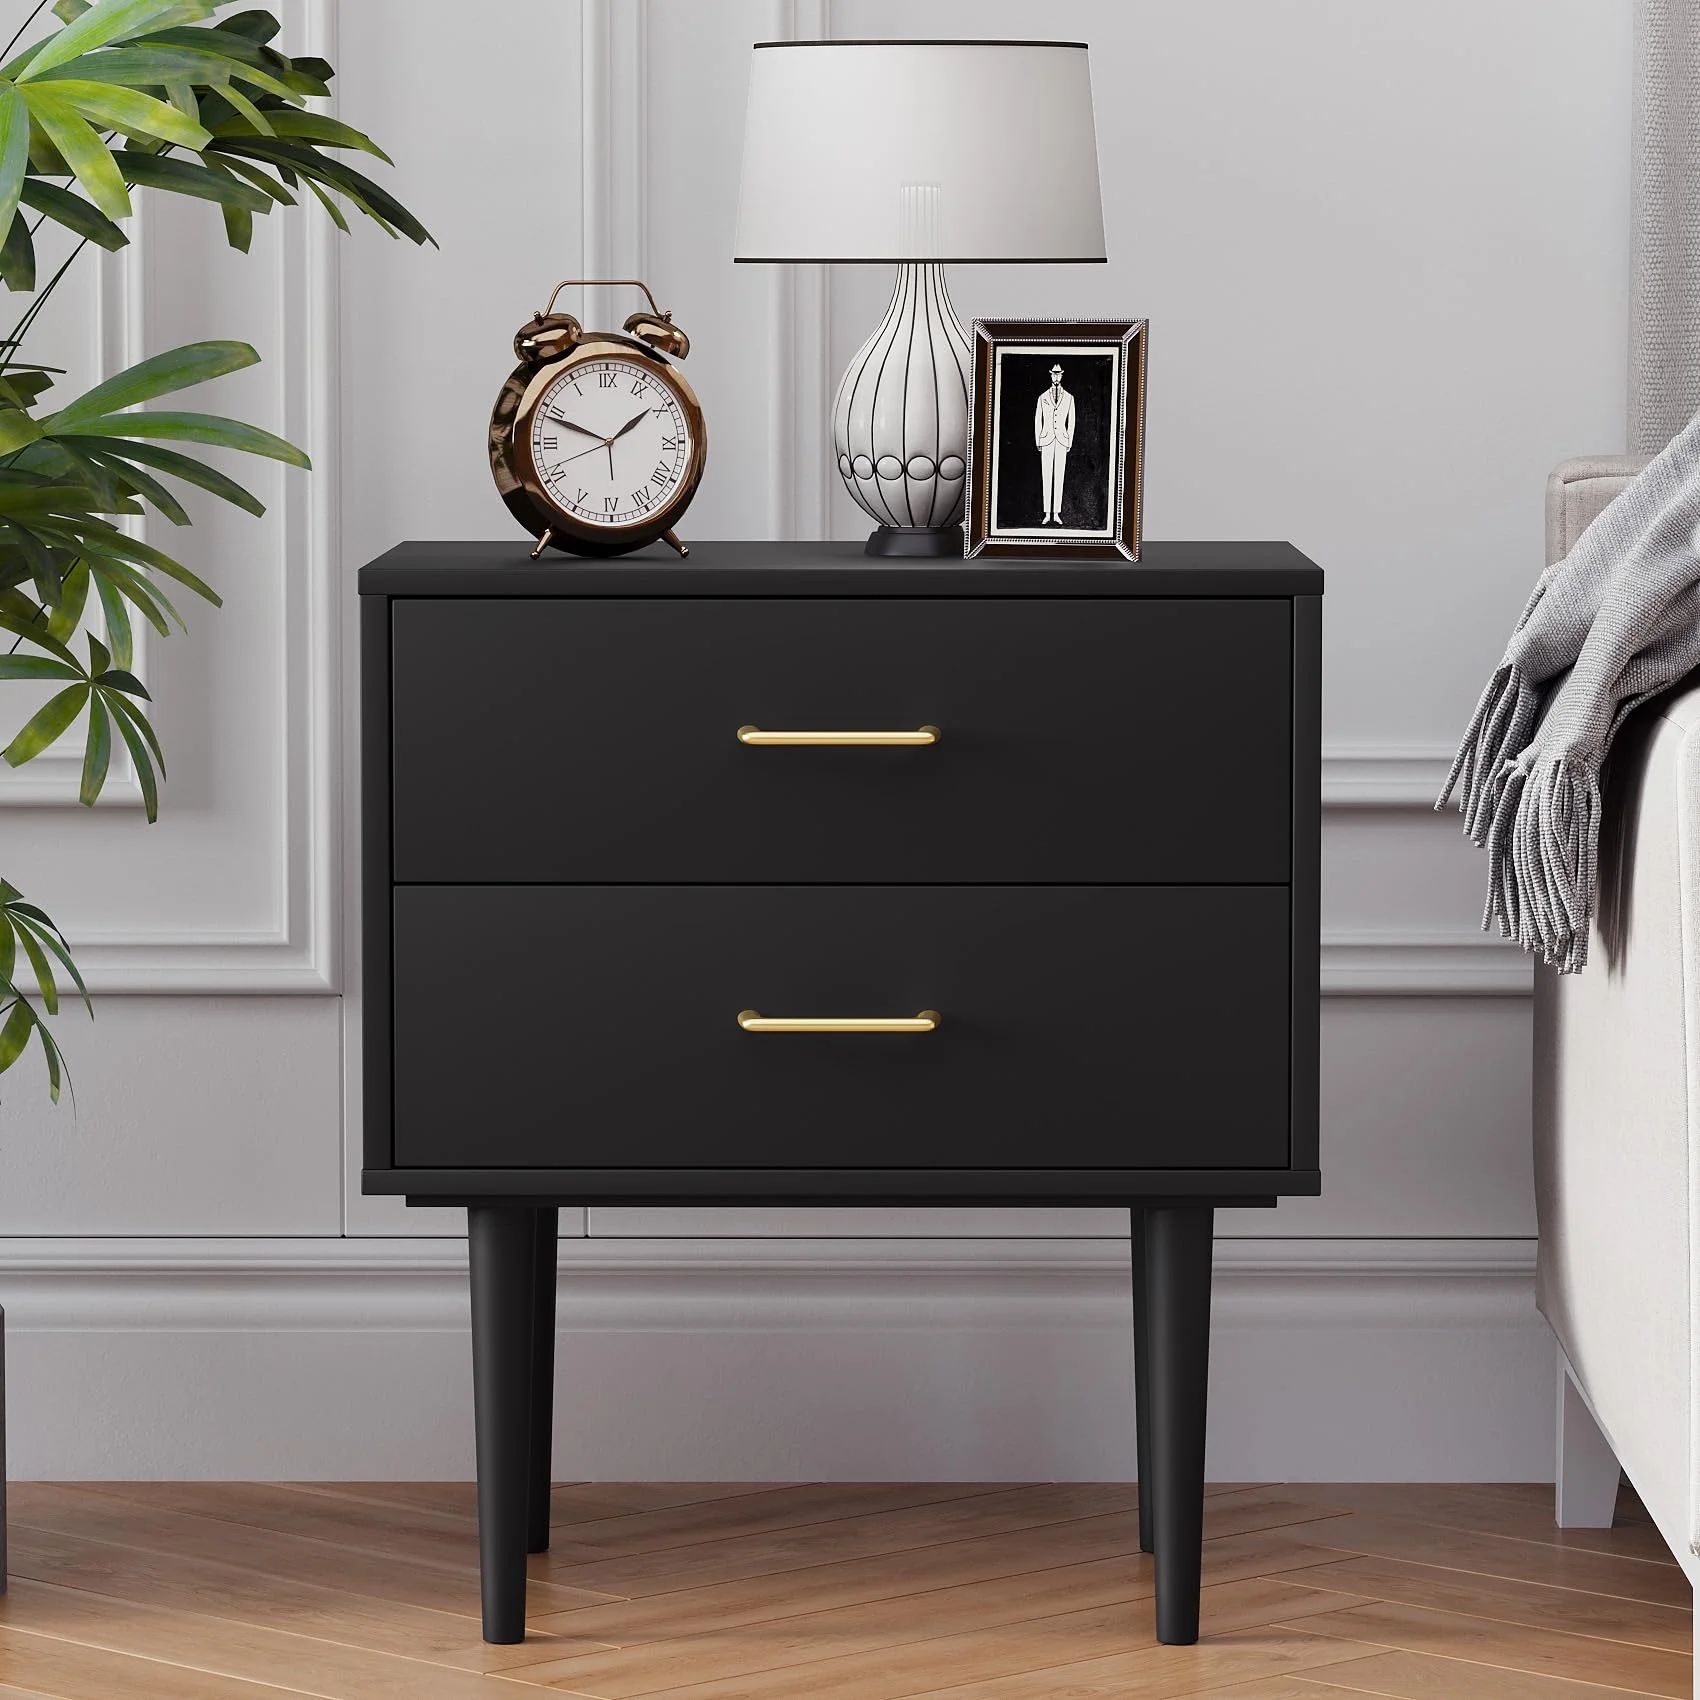 Semiocthome Modern 2 Drawers Nightstand,Classic Bedside Table for Bedroom in Black,Adult,Sturdy W... | Walmart (US)